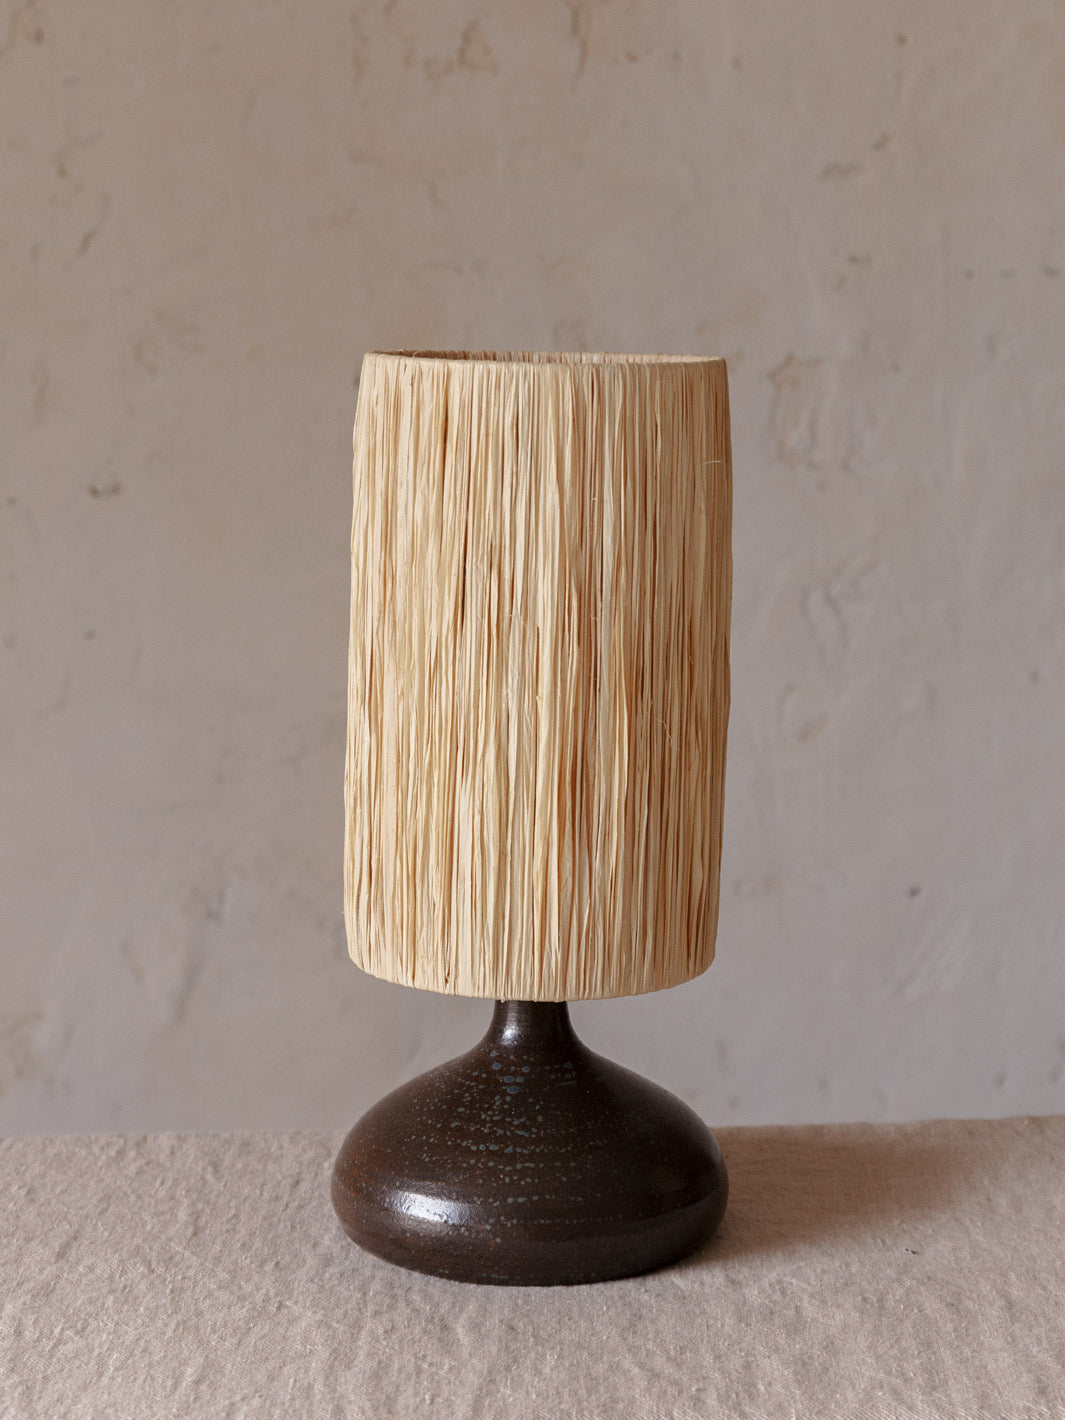 Pair of Fabien Comte lamps from the 70s